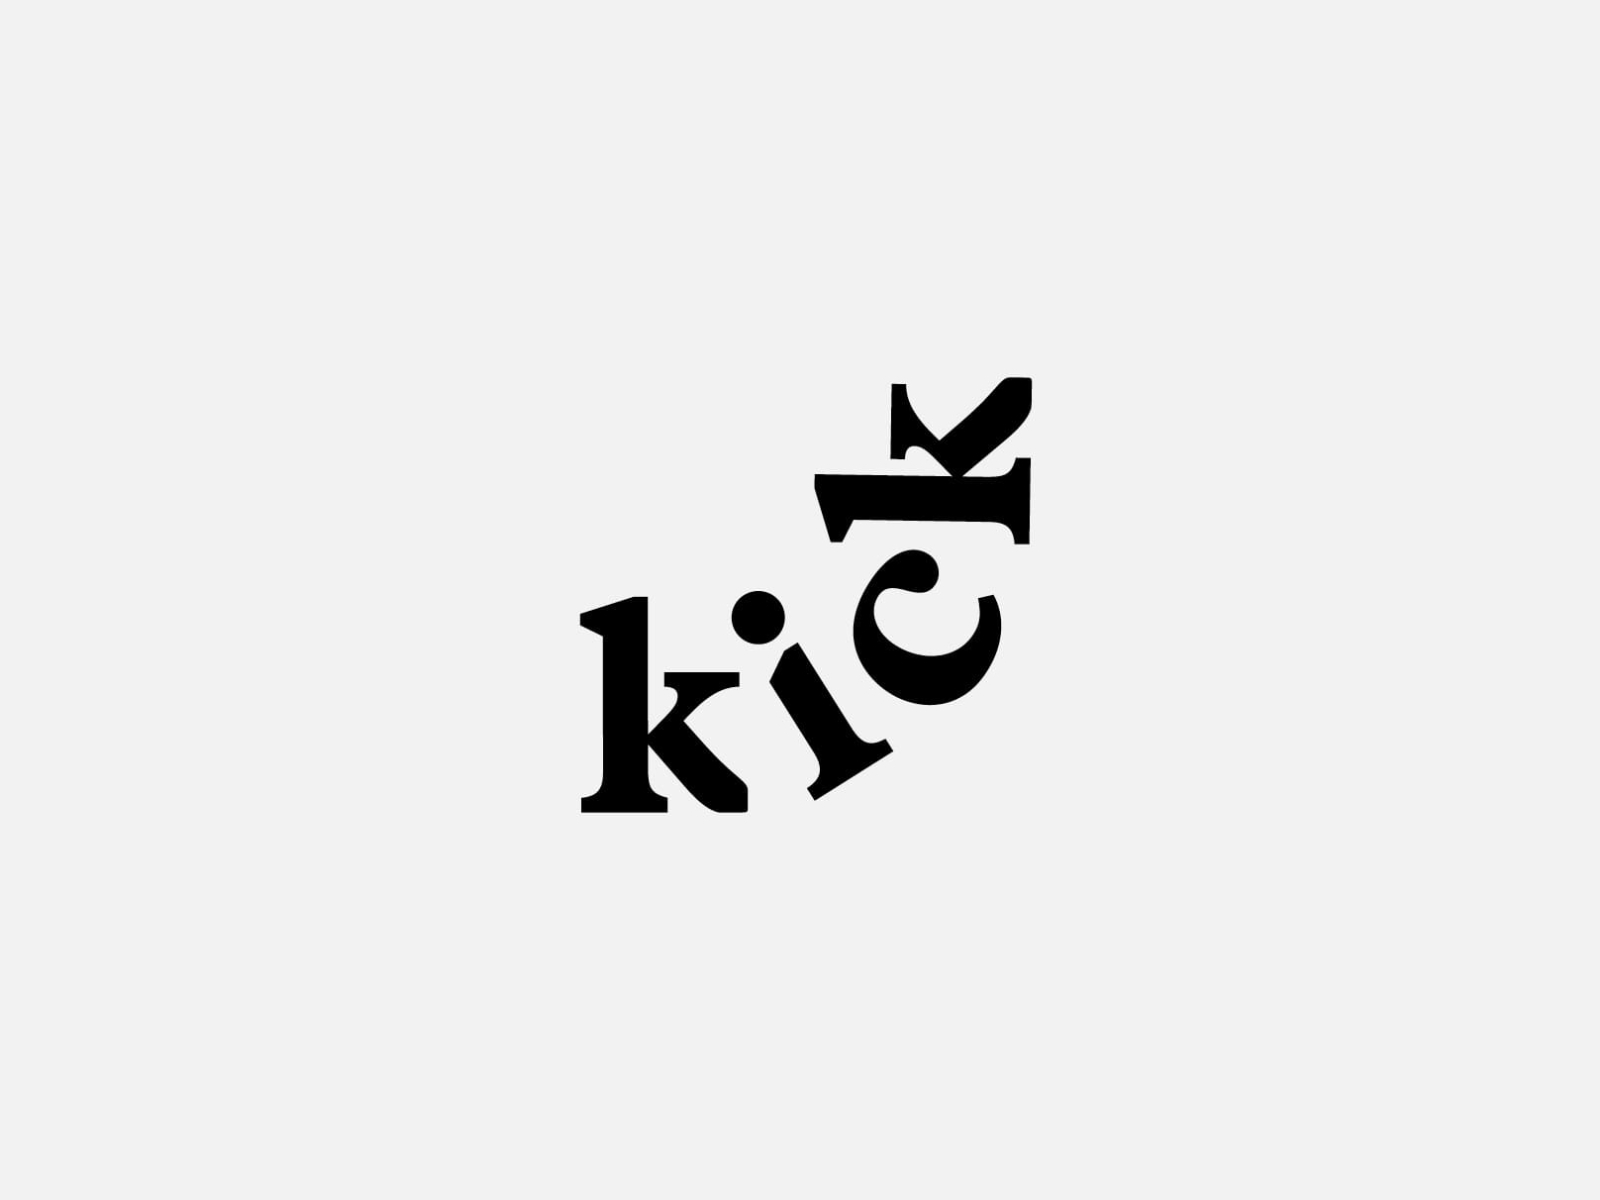 Kick project - logo by Thierry Tönnes on Dribbble